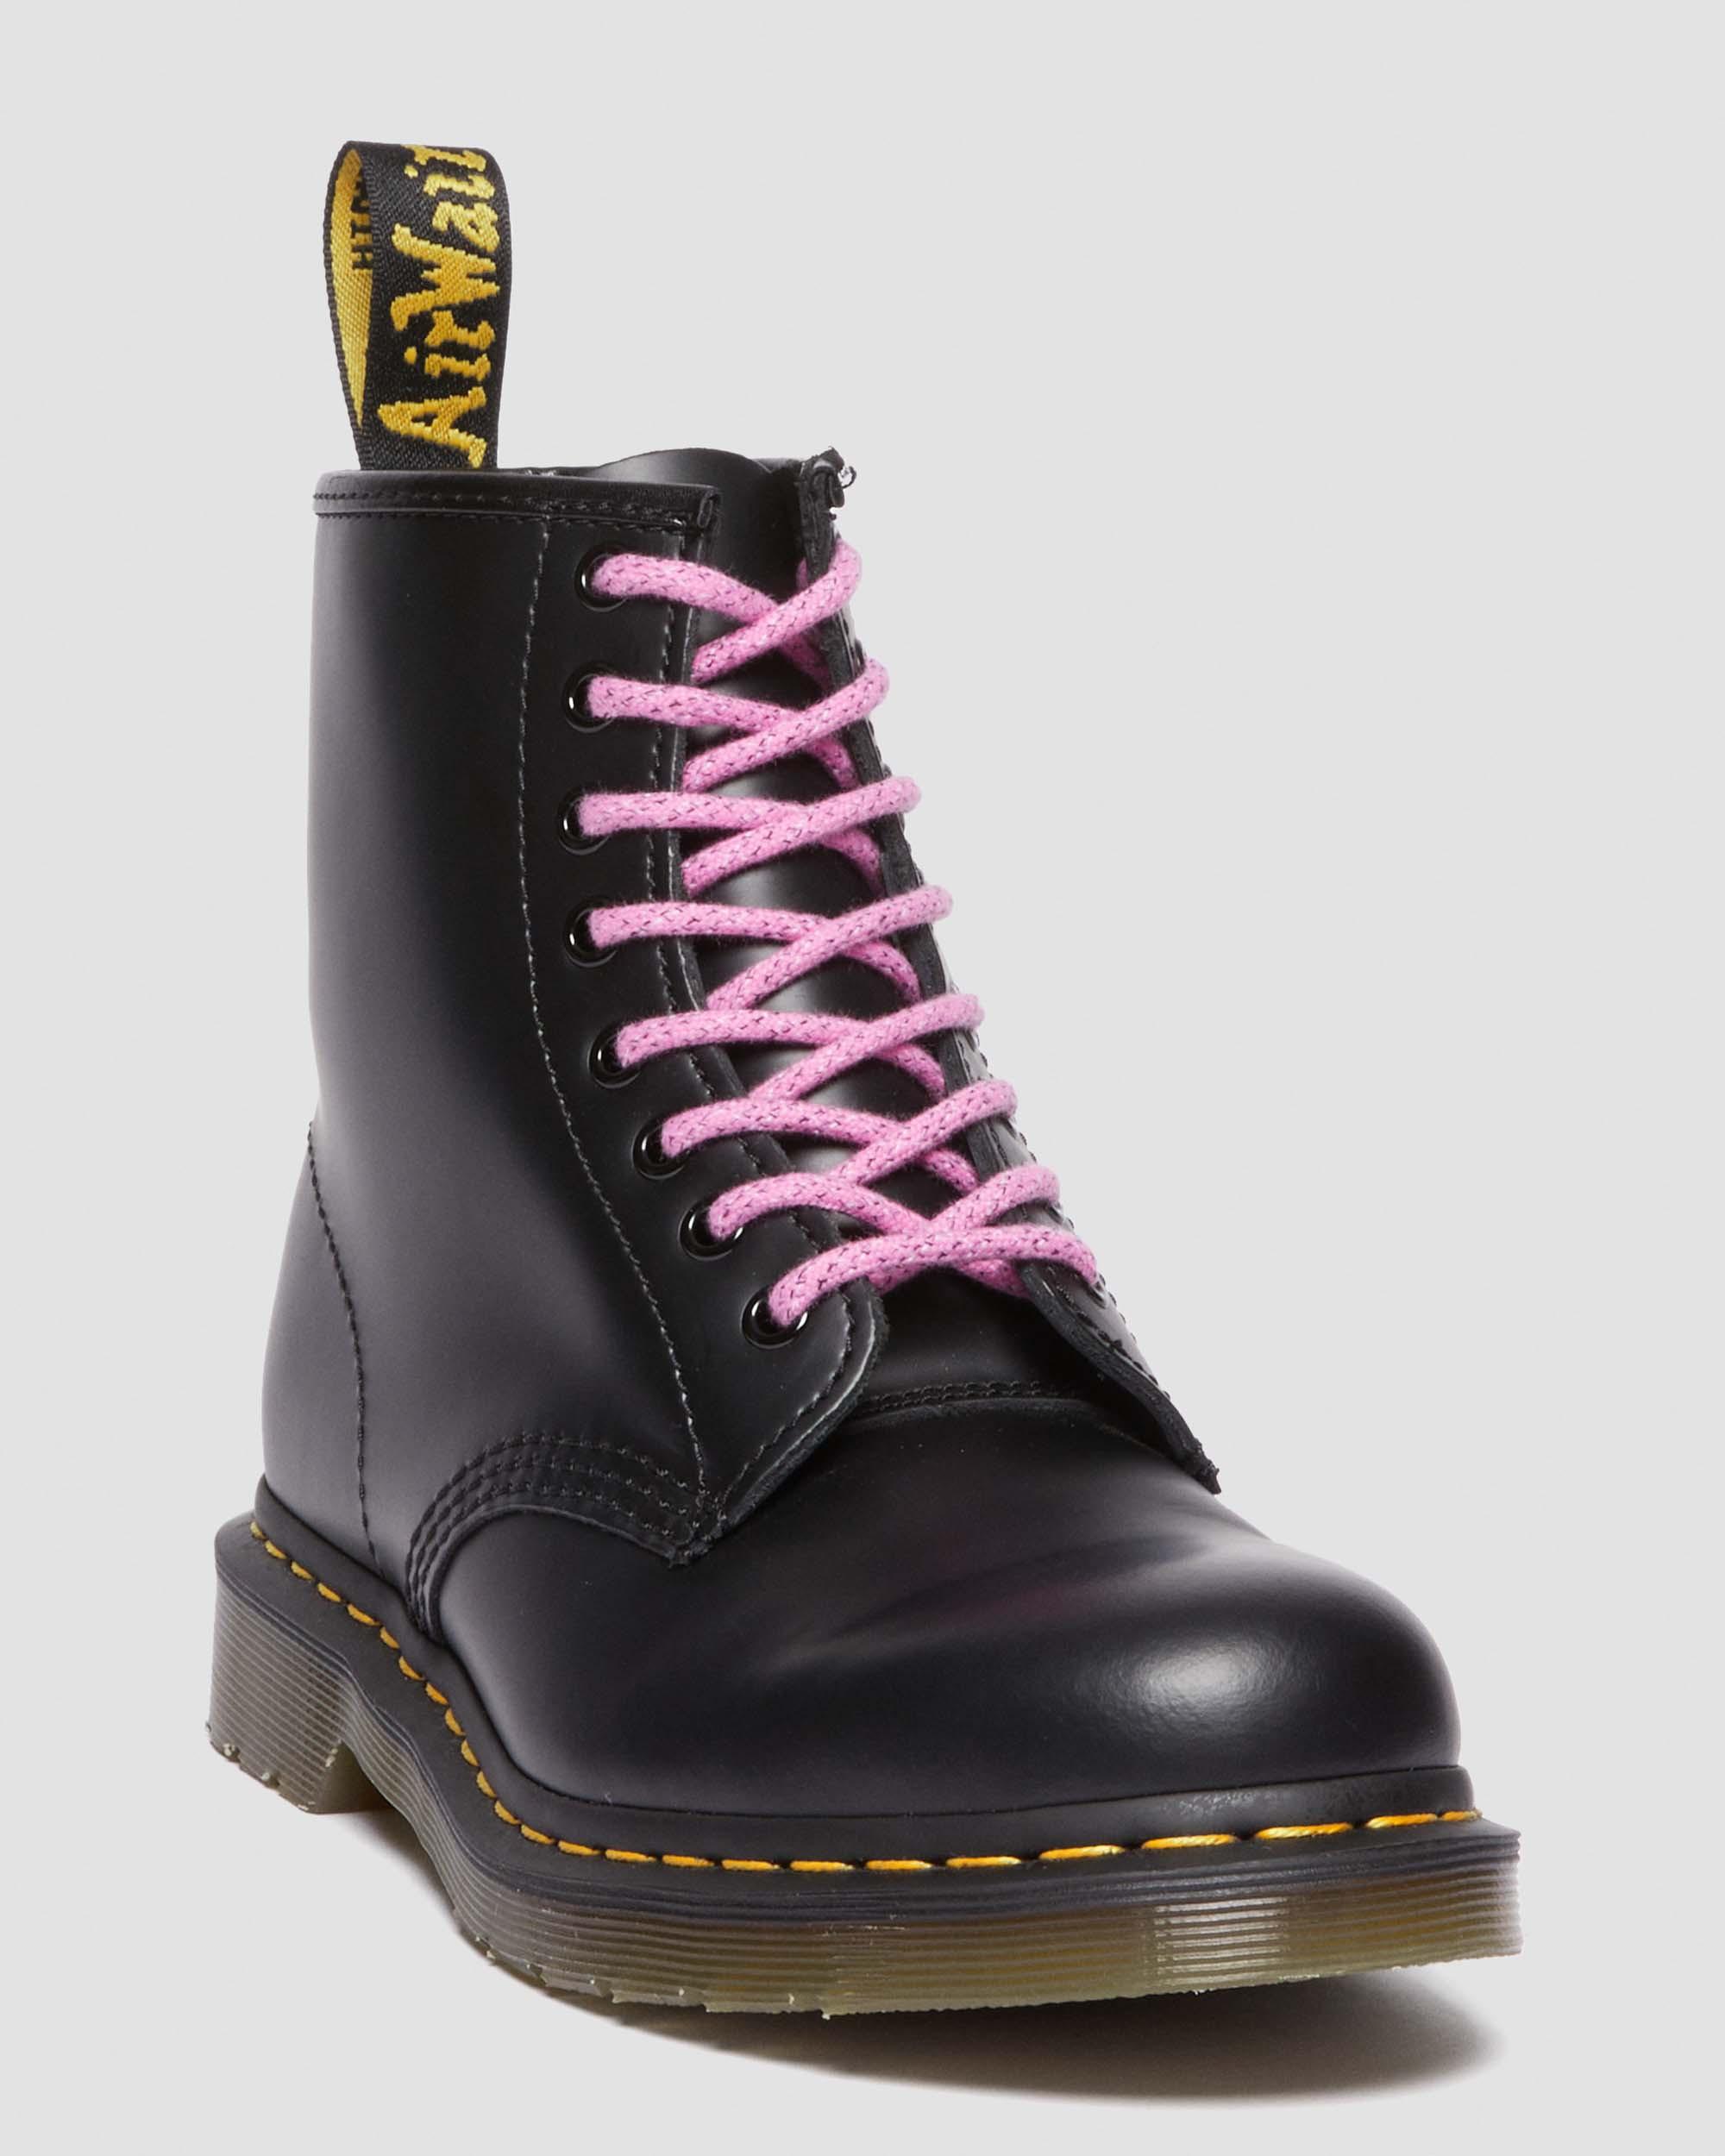 1460 Vintage Made in England Lace Up Boots in Black | Dr. Martens